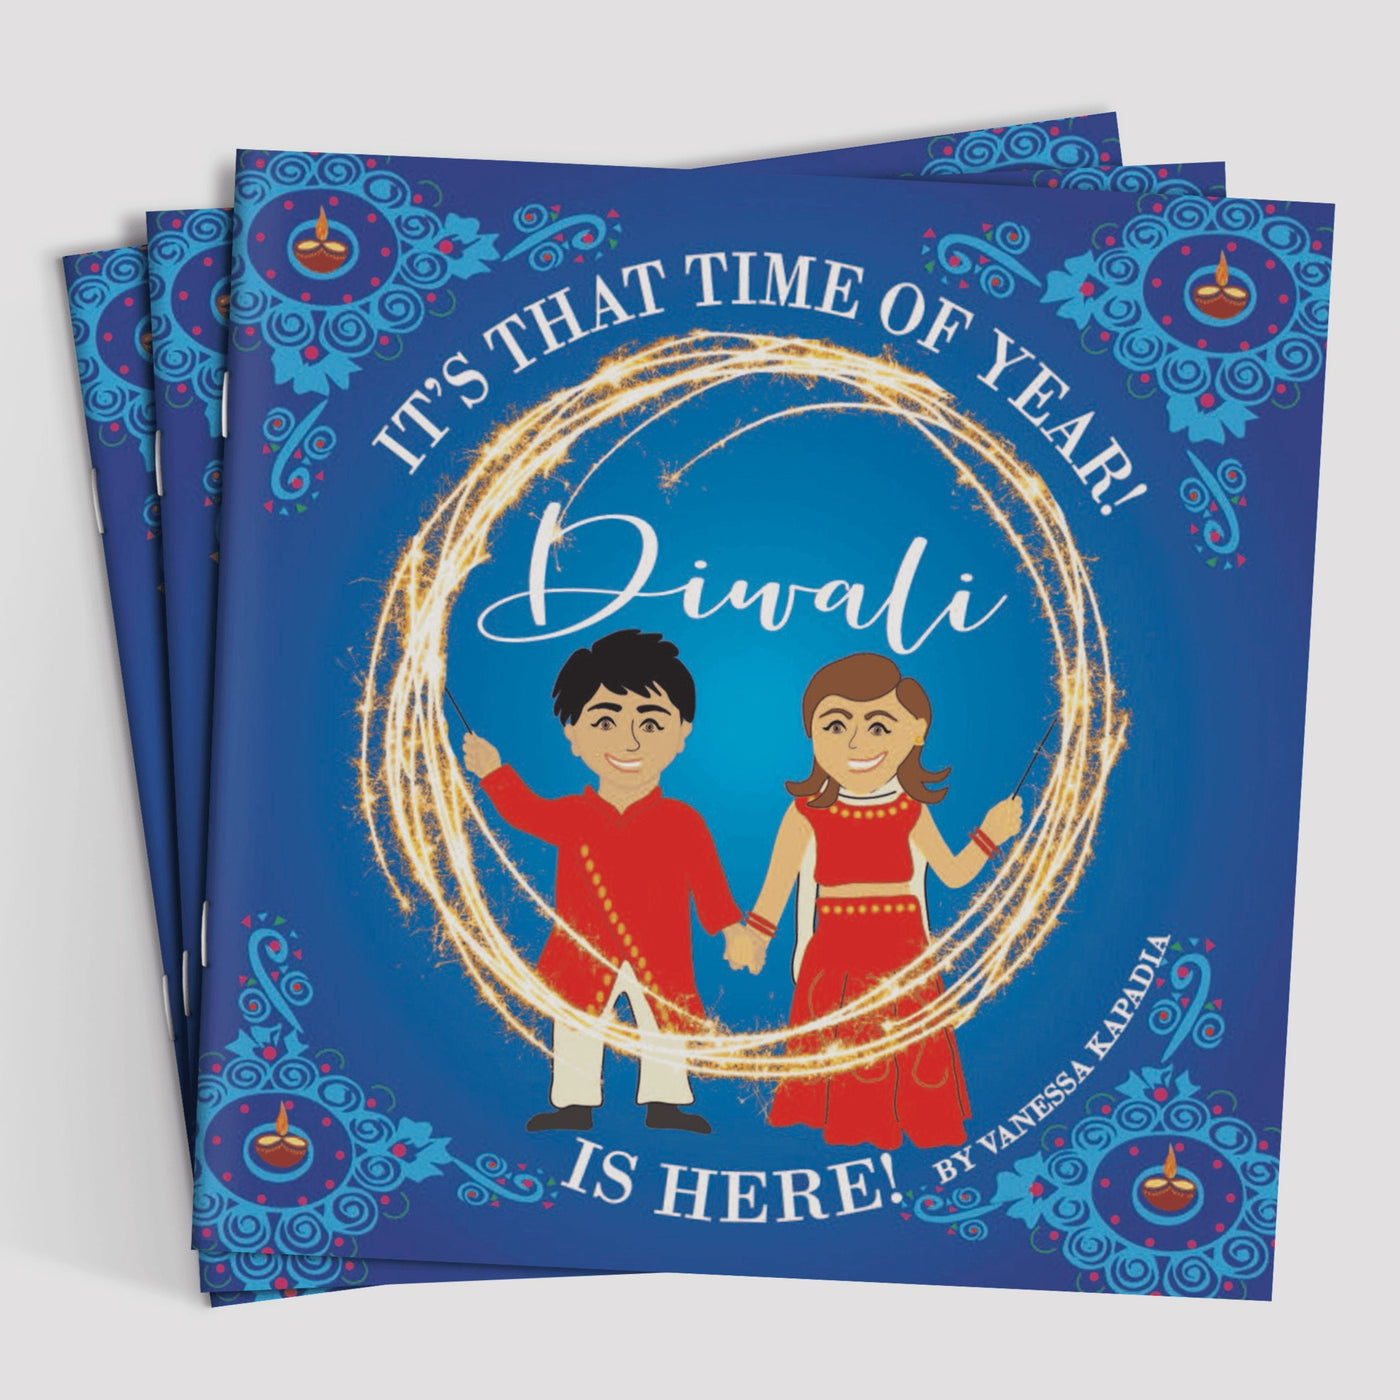 Diwali Book by Time of Year series